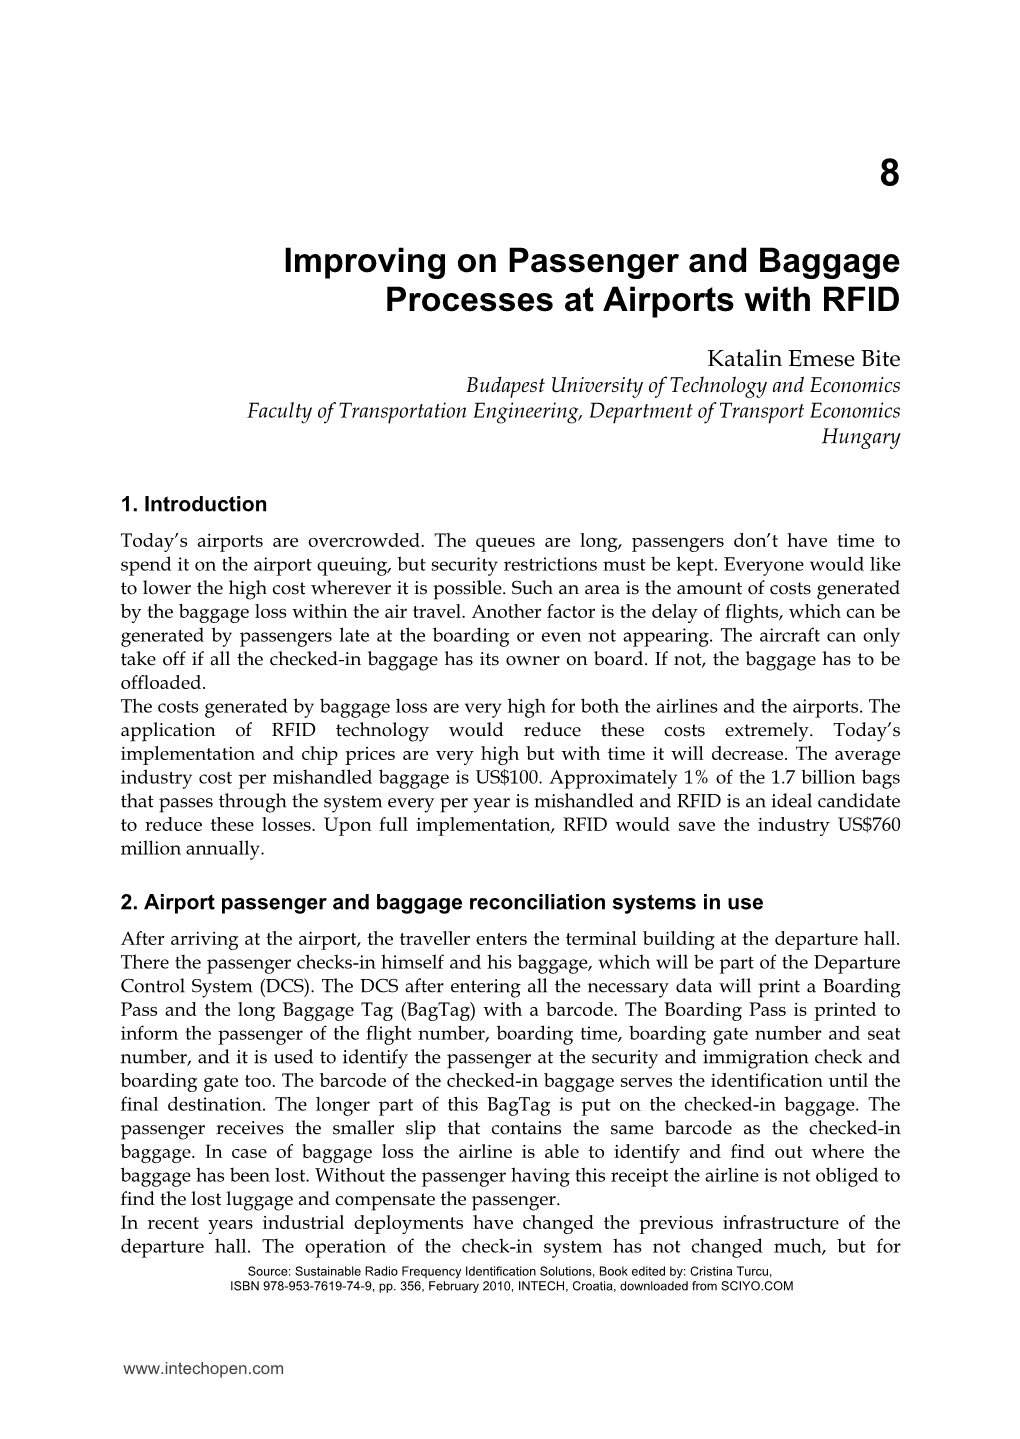 Improving on Passenger and Baggage Processes at Airports with RFID